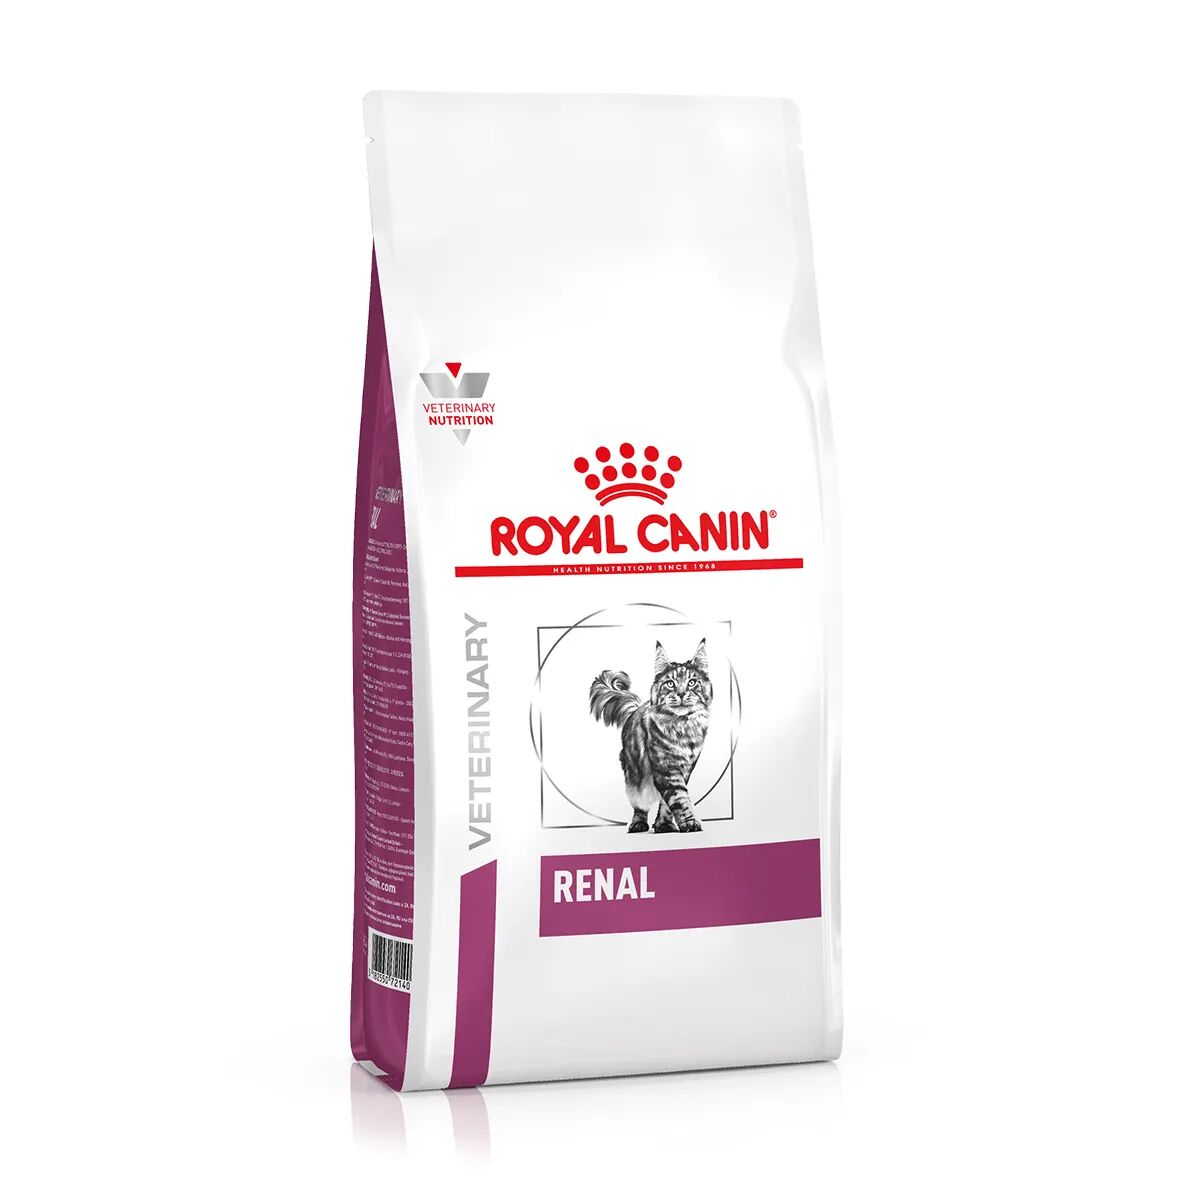 ROYAL CANIN V-Diet Renal Gatto 400G